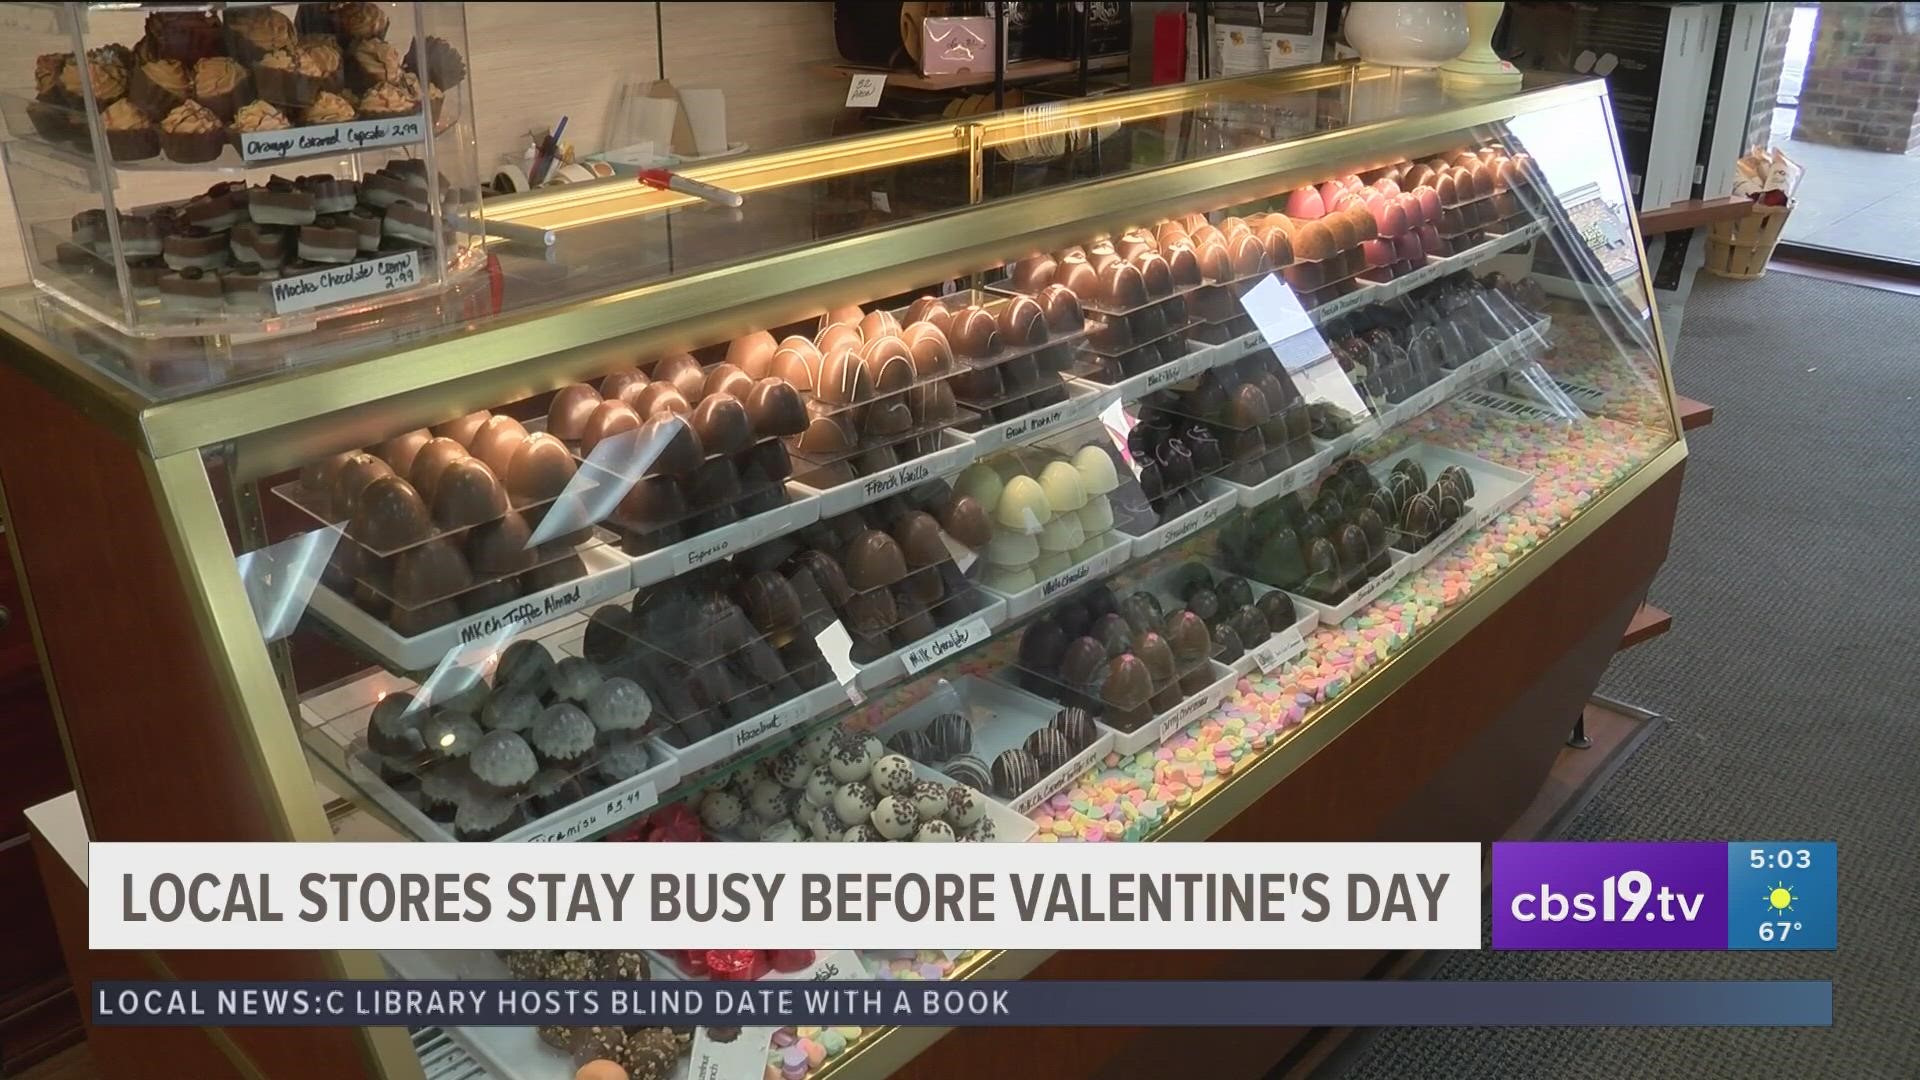 Sweet Gourmet has 28 feet of chocolate cases that contain handmade chocolate by artisans from all over the country.